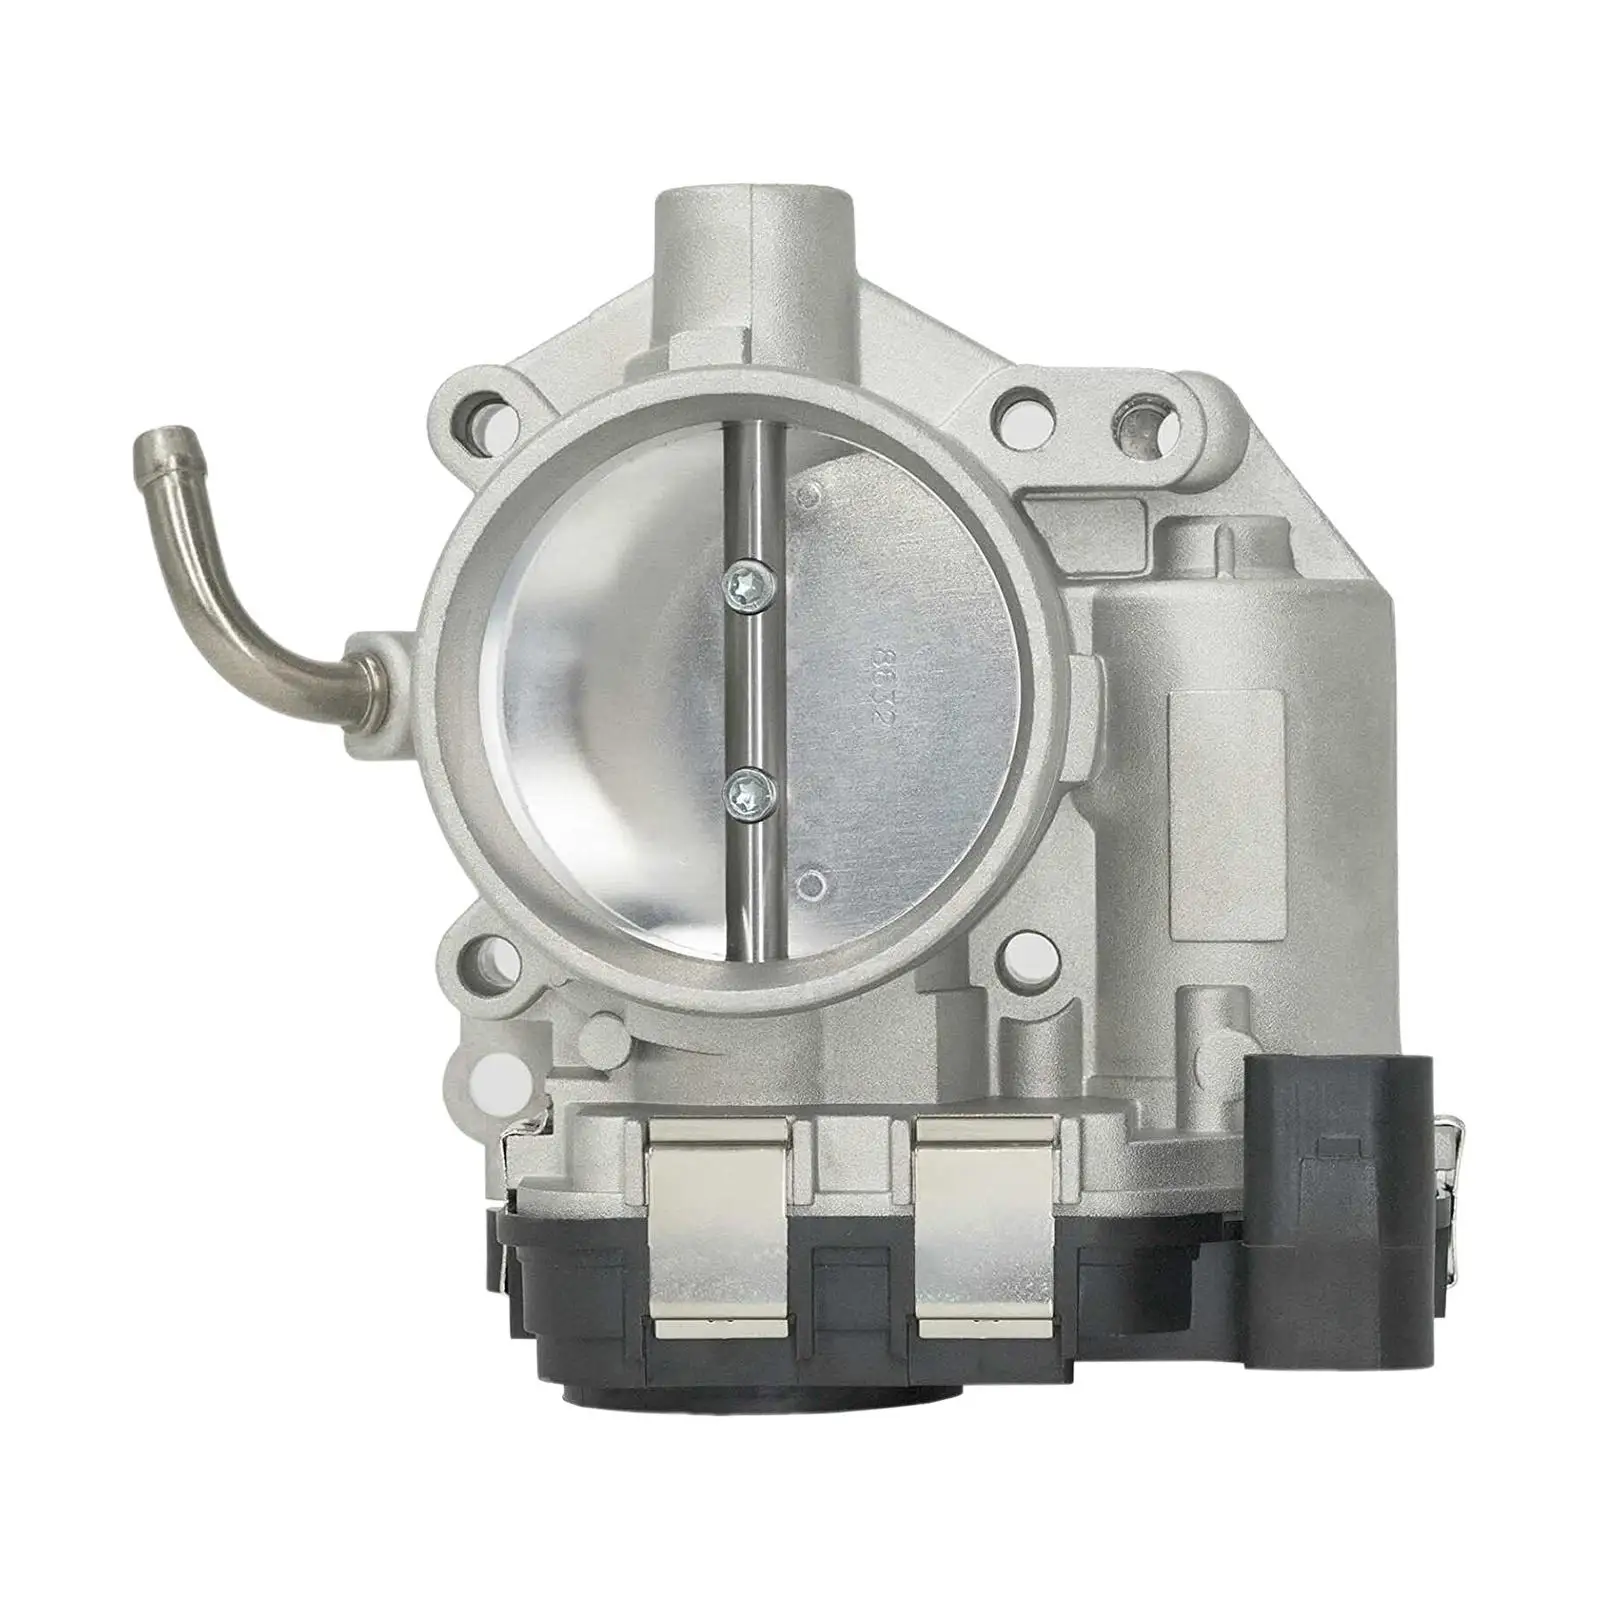 07K133062A Throttle Body Durable Repair Parts Easy Installation Spare Parts Accessory Replace for Jetta 2.5L Engines